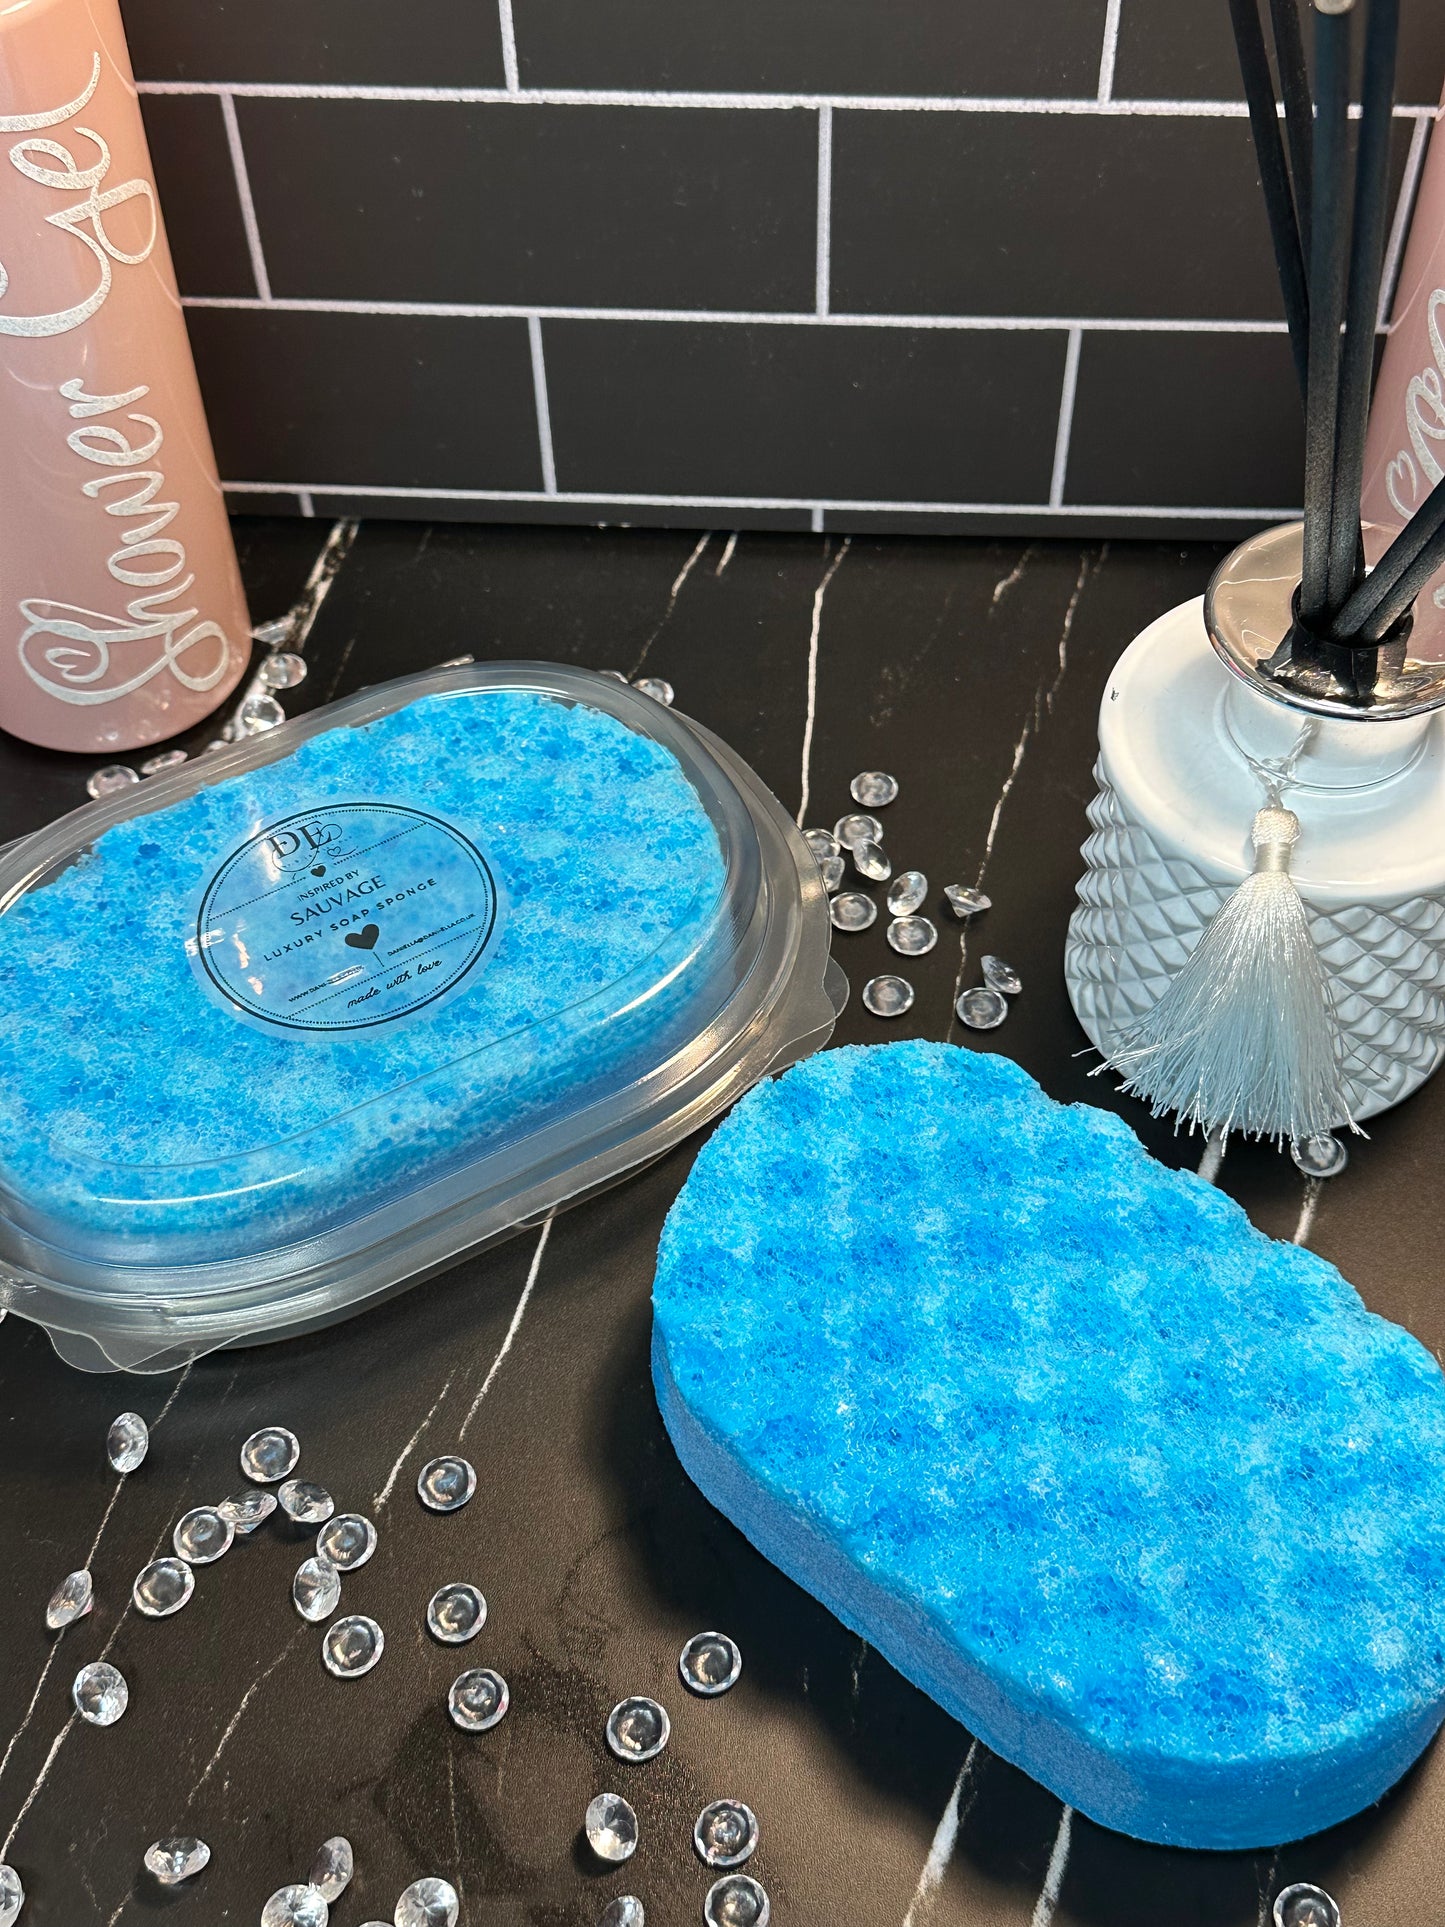 BATH & Body Exfoliating Smooth Luxury Soap Sponge - Inspired by Sauvage